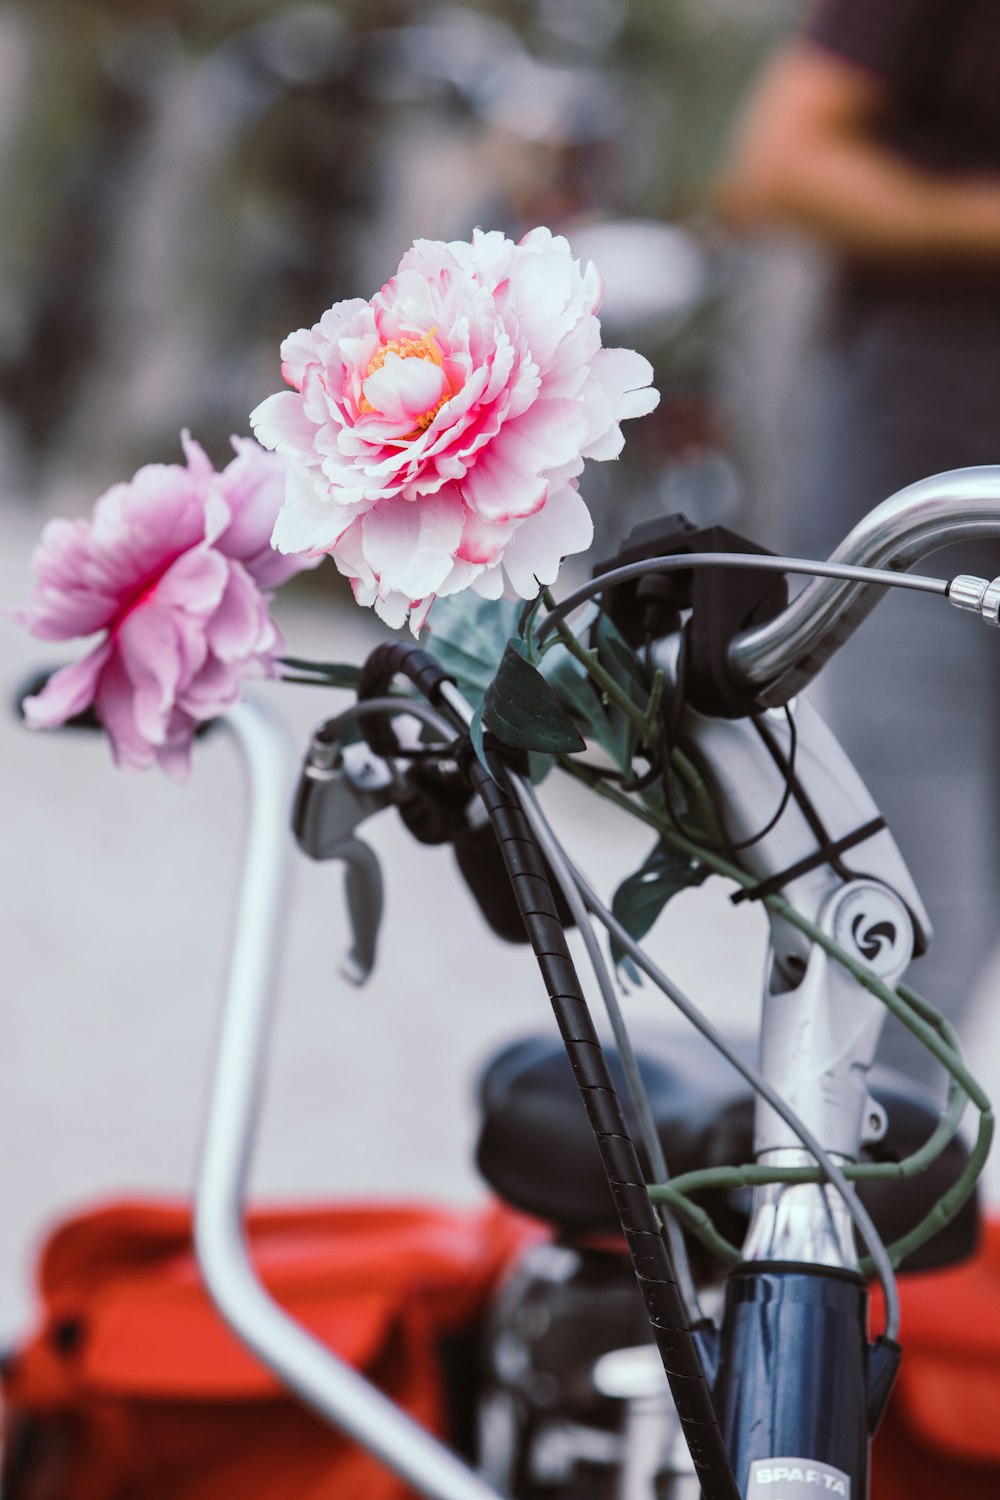 a close up of a bicycle handlebar with a flower on it